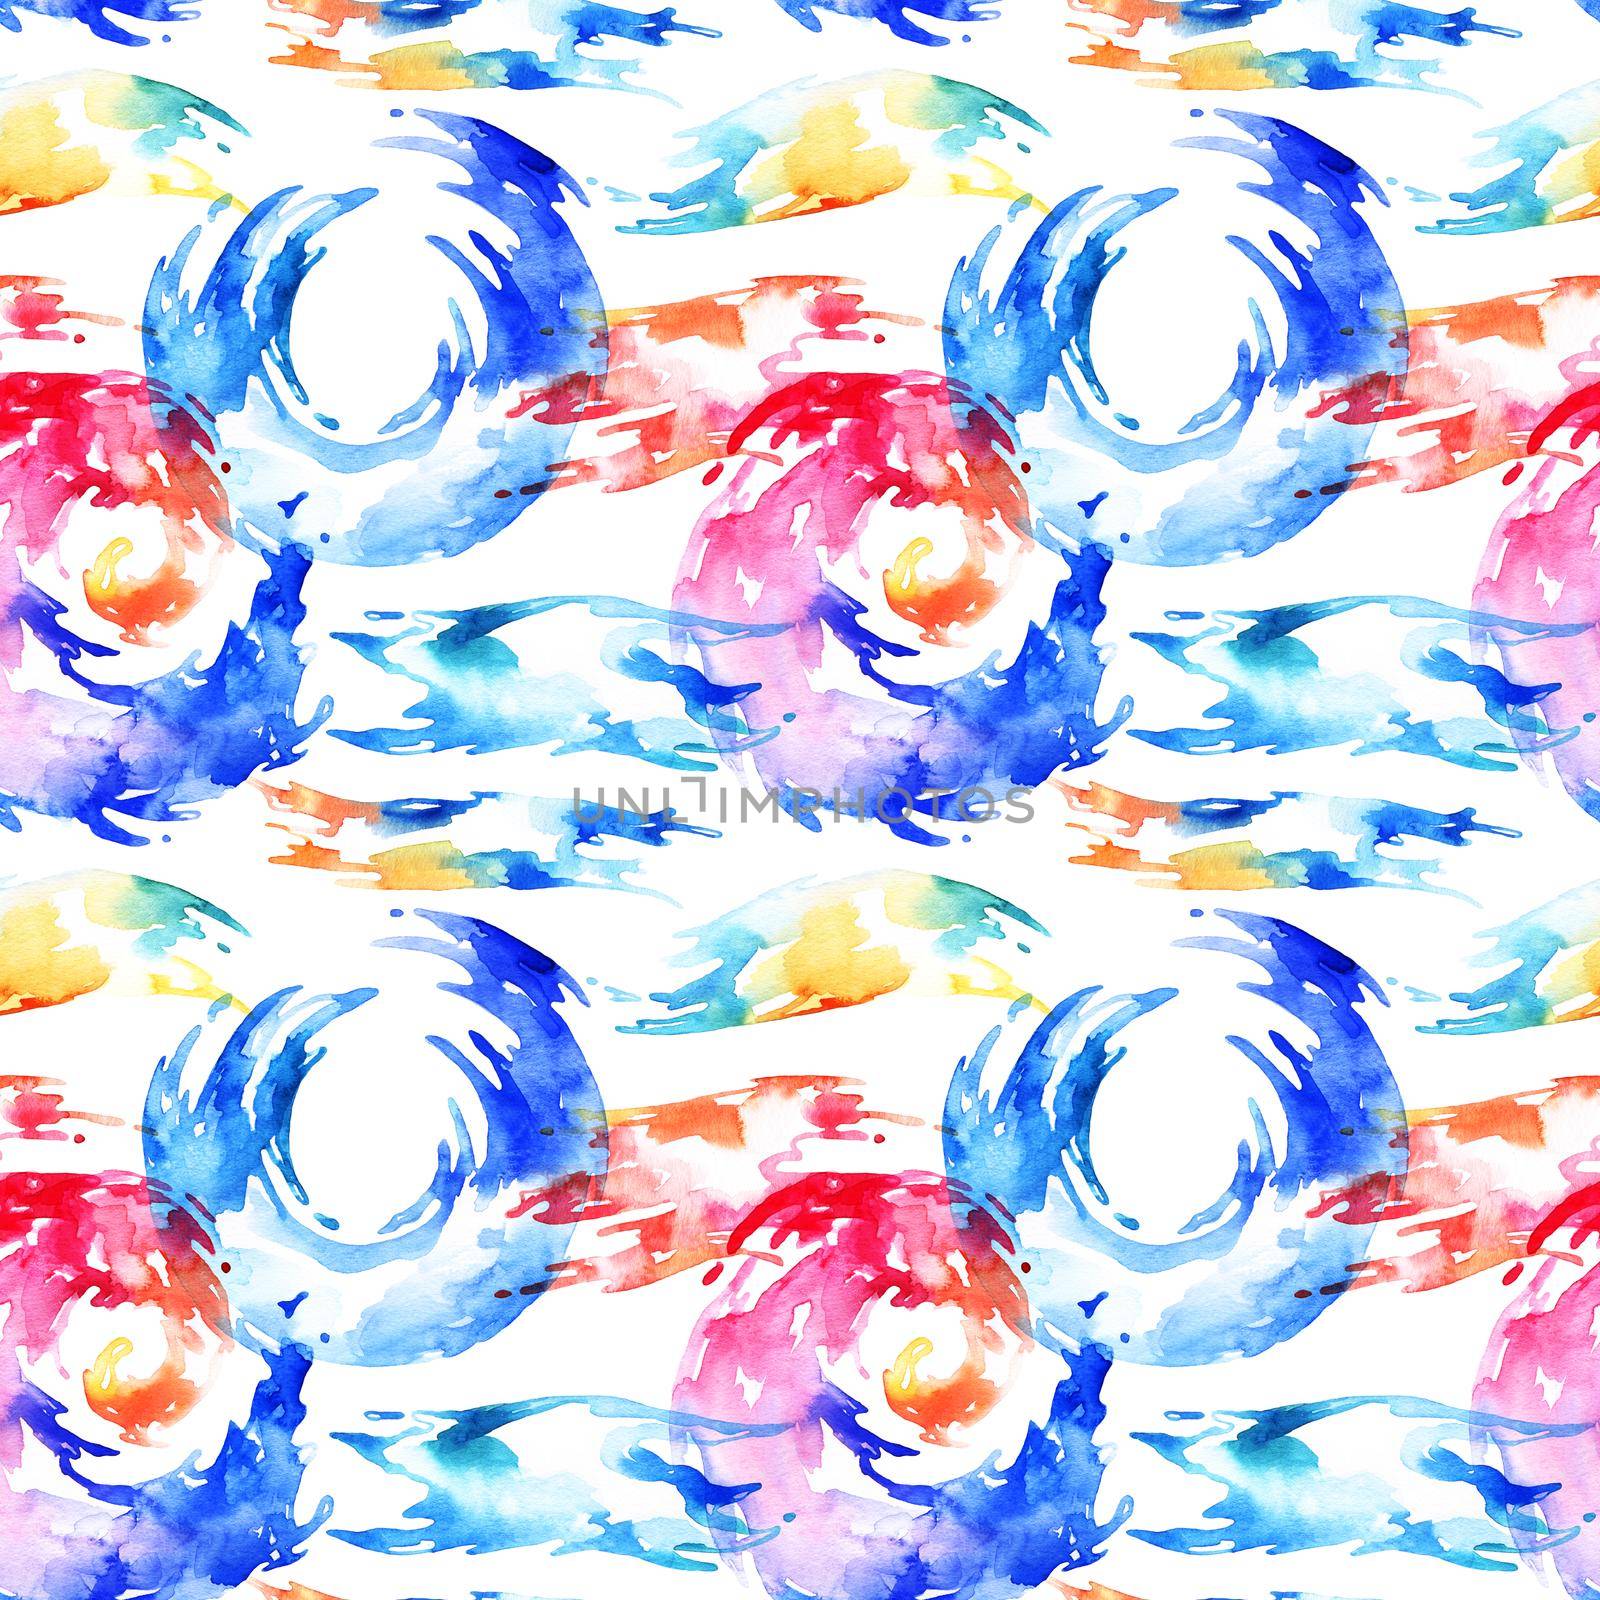 Abstract seamless pattern with watercolor color stains - hand drawn decorative elements on white background